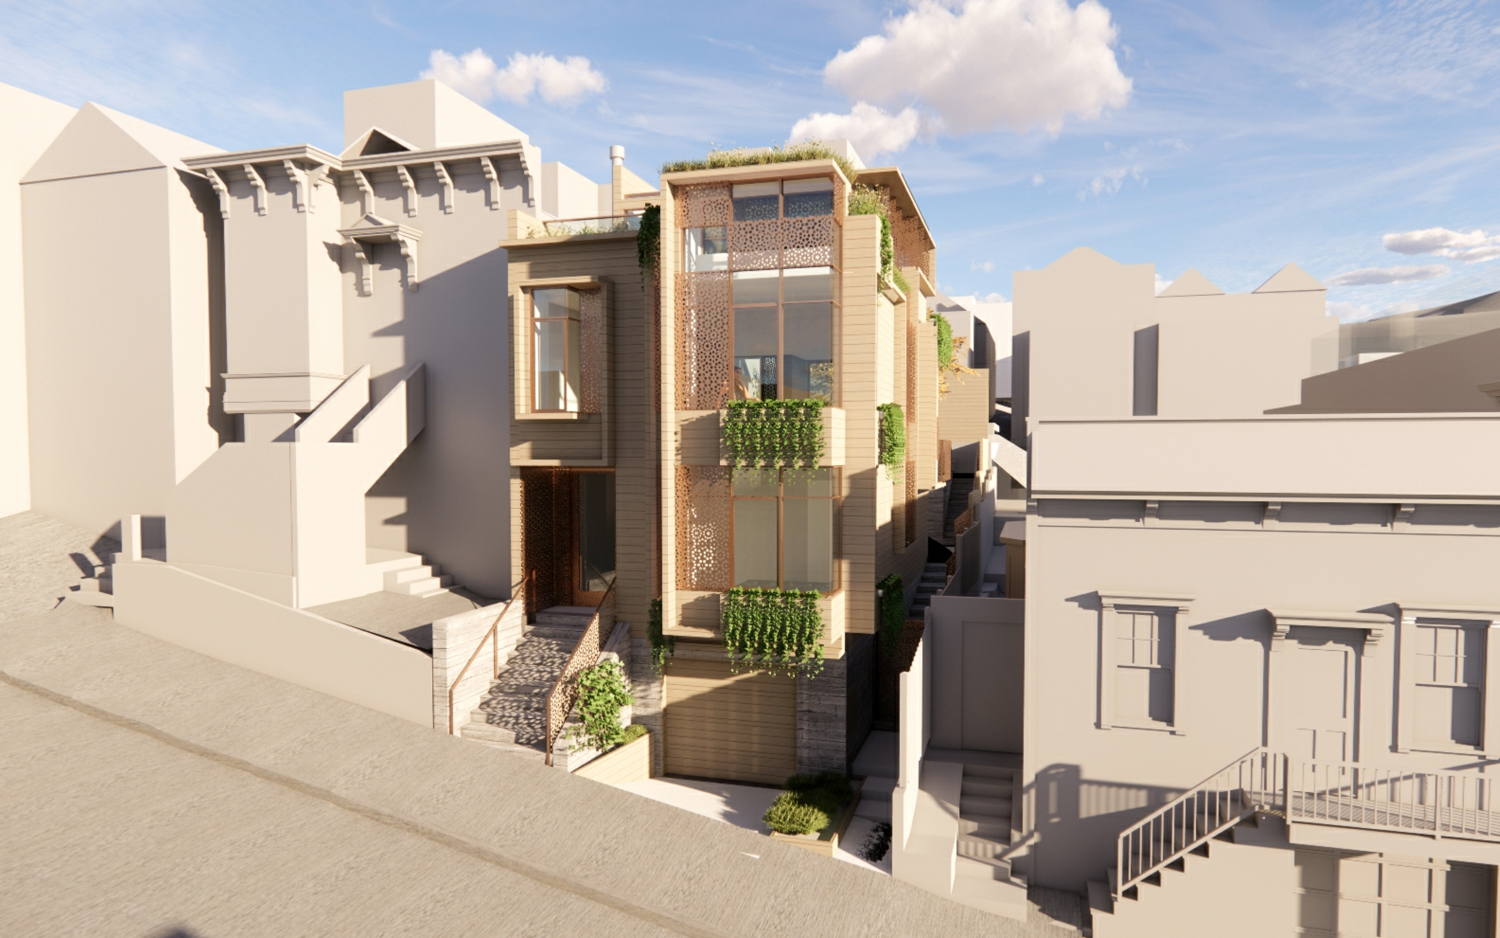 315 Rutledge Street front facade view, rendering by DOES Architecture